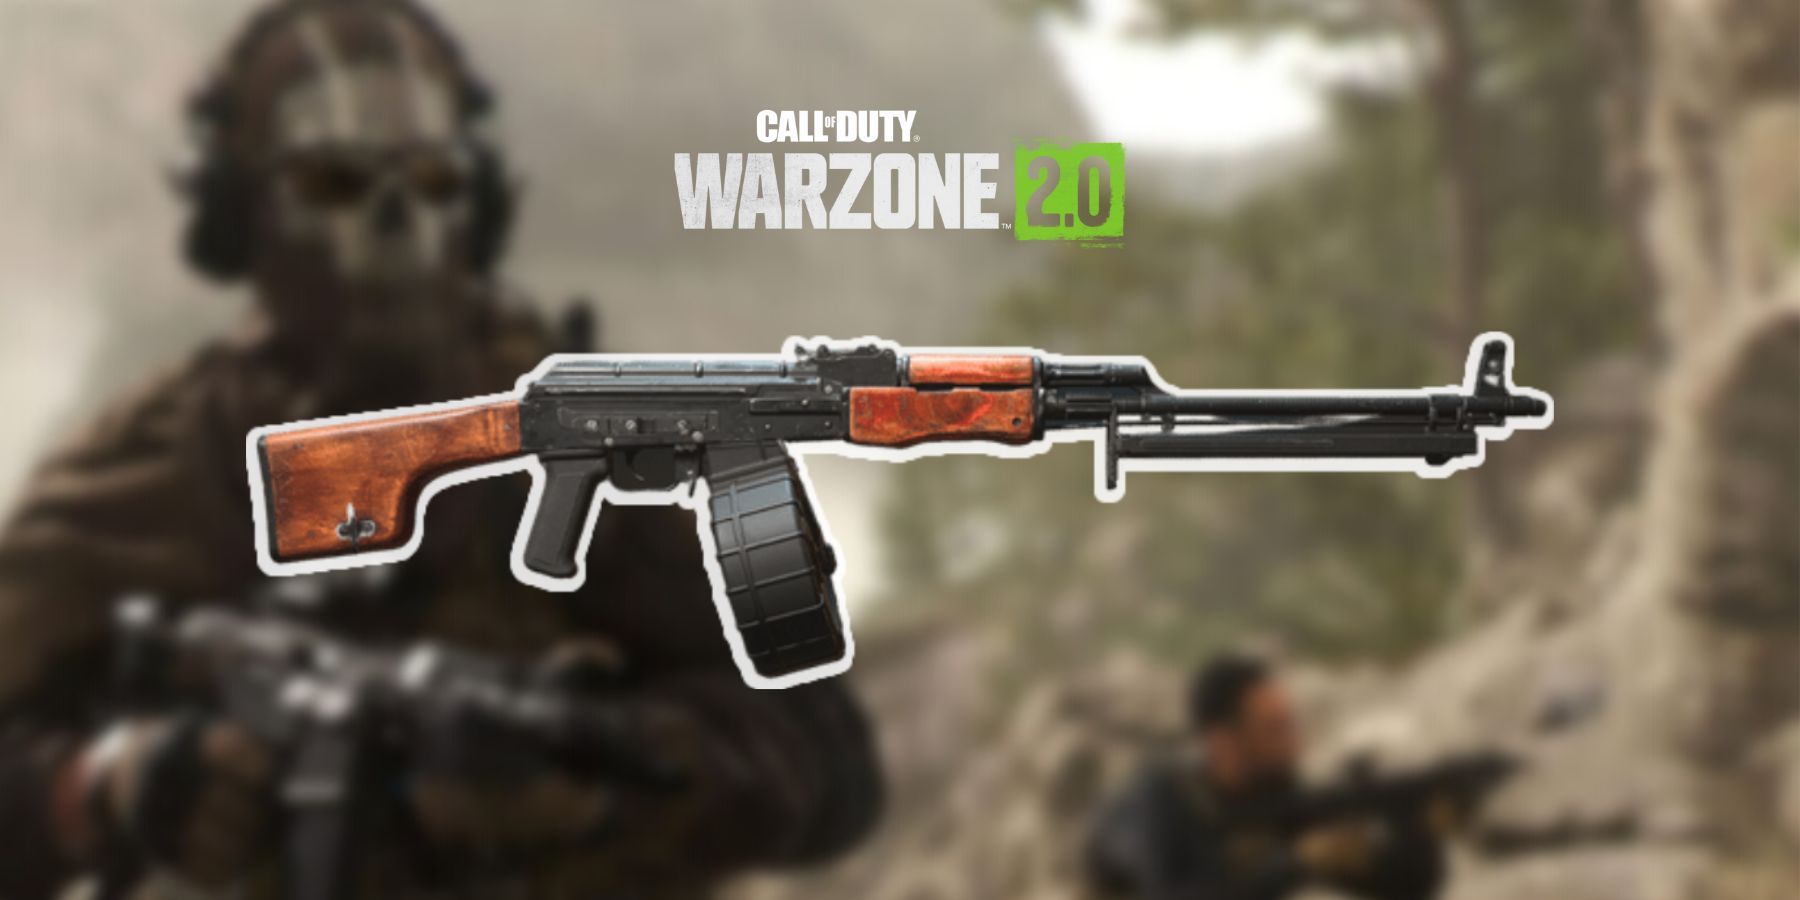 image showing the rpk in call of duty warzone 2.0.